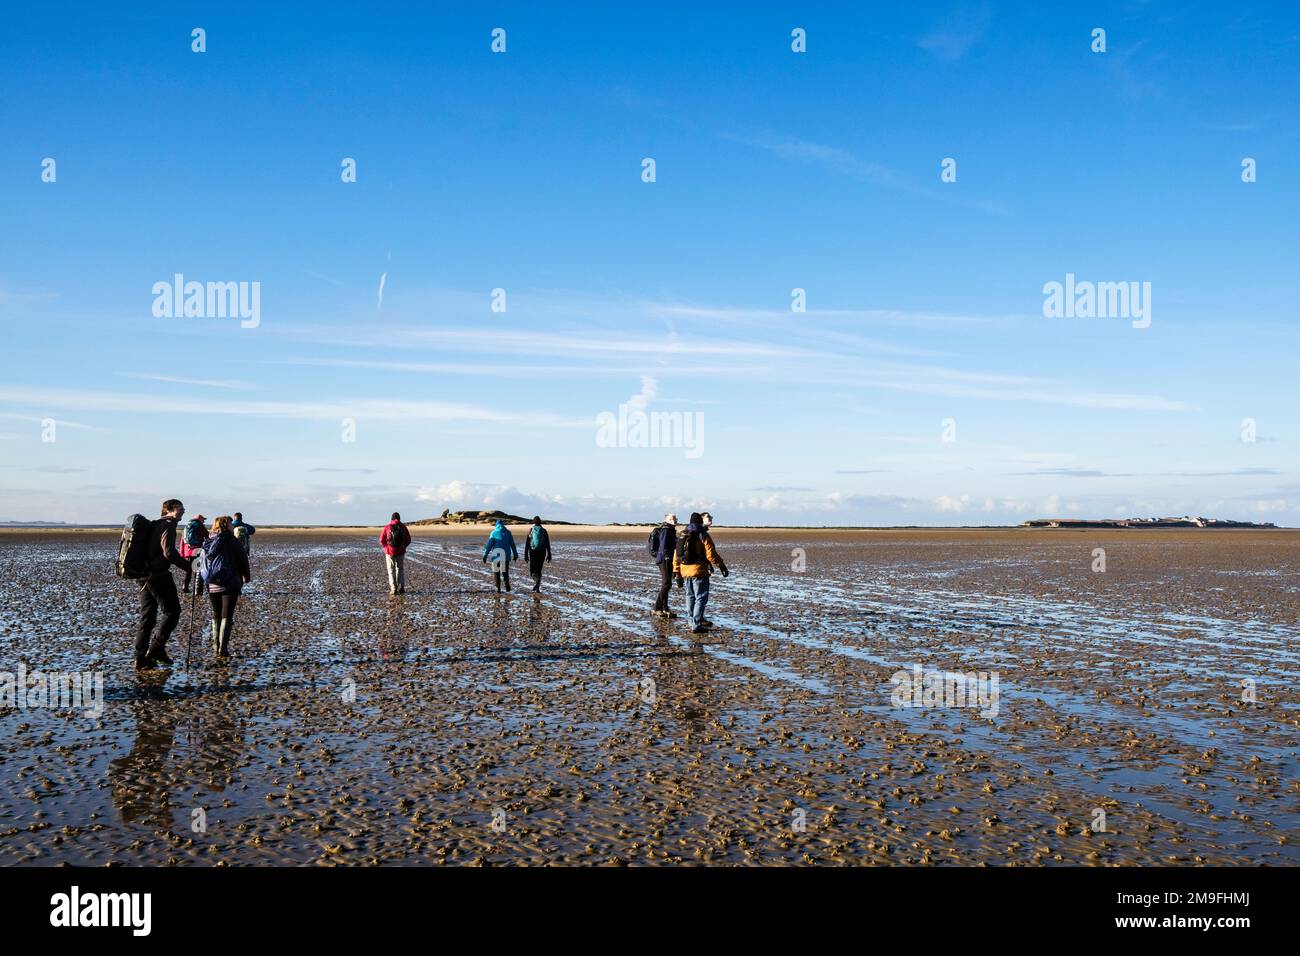 Group of people walking to Little Eve island on way to Hilbre Island in Dee Estuary at low tide from West Kirby, Wirral Peninsula, Merseyside, England Stock Photo